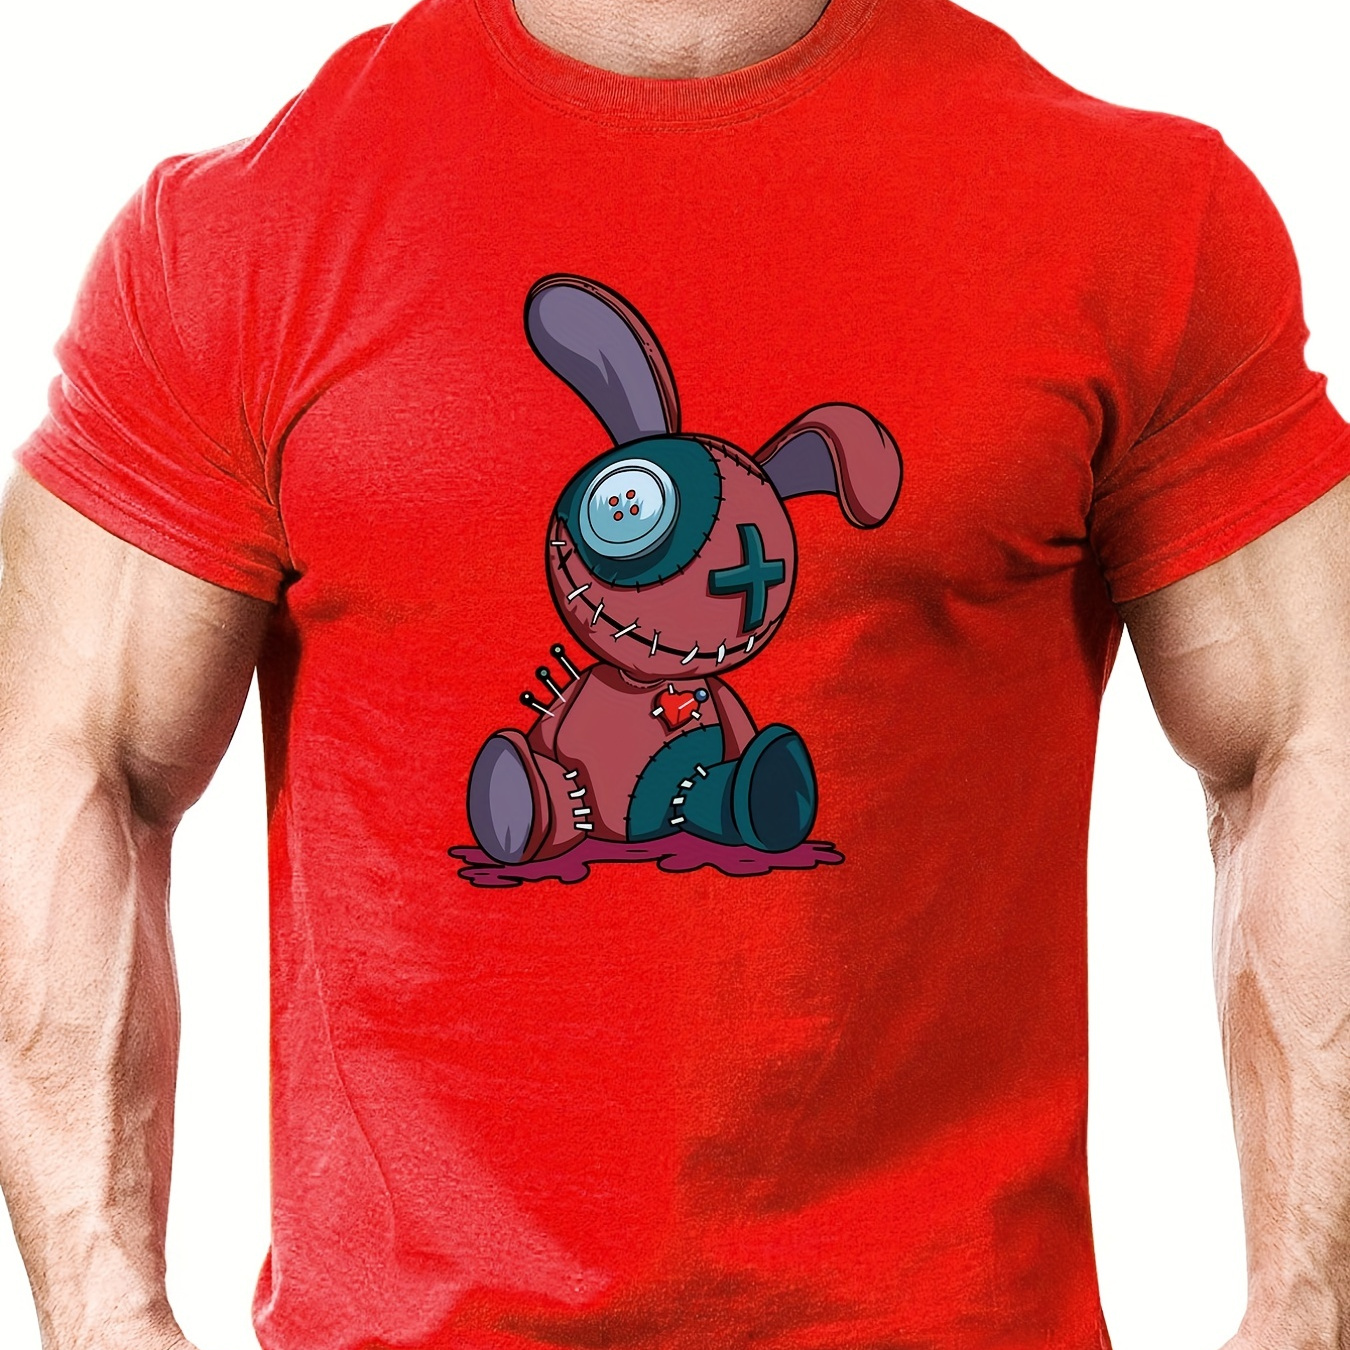 

Toy Rabbit With Stitches, Men's Casual Mid Stretch Crew Neck Graphic Tee, Male Clothes For Summer